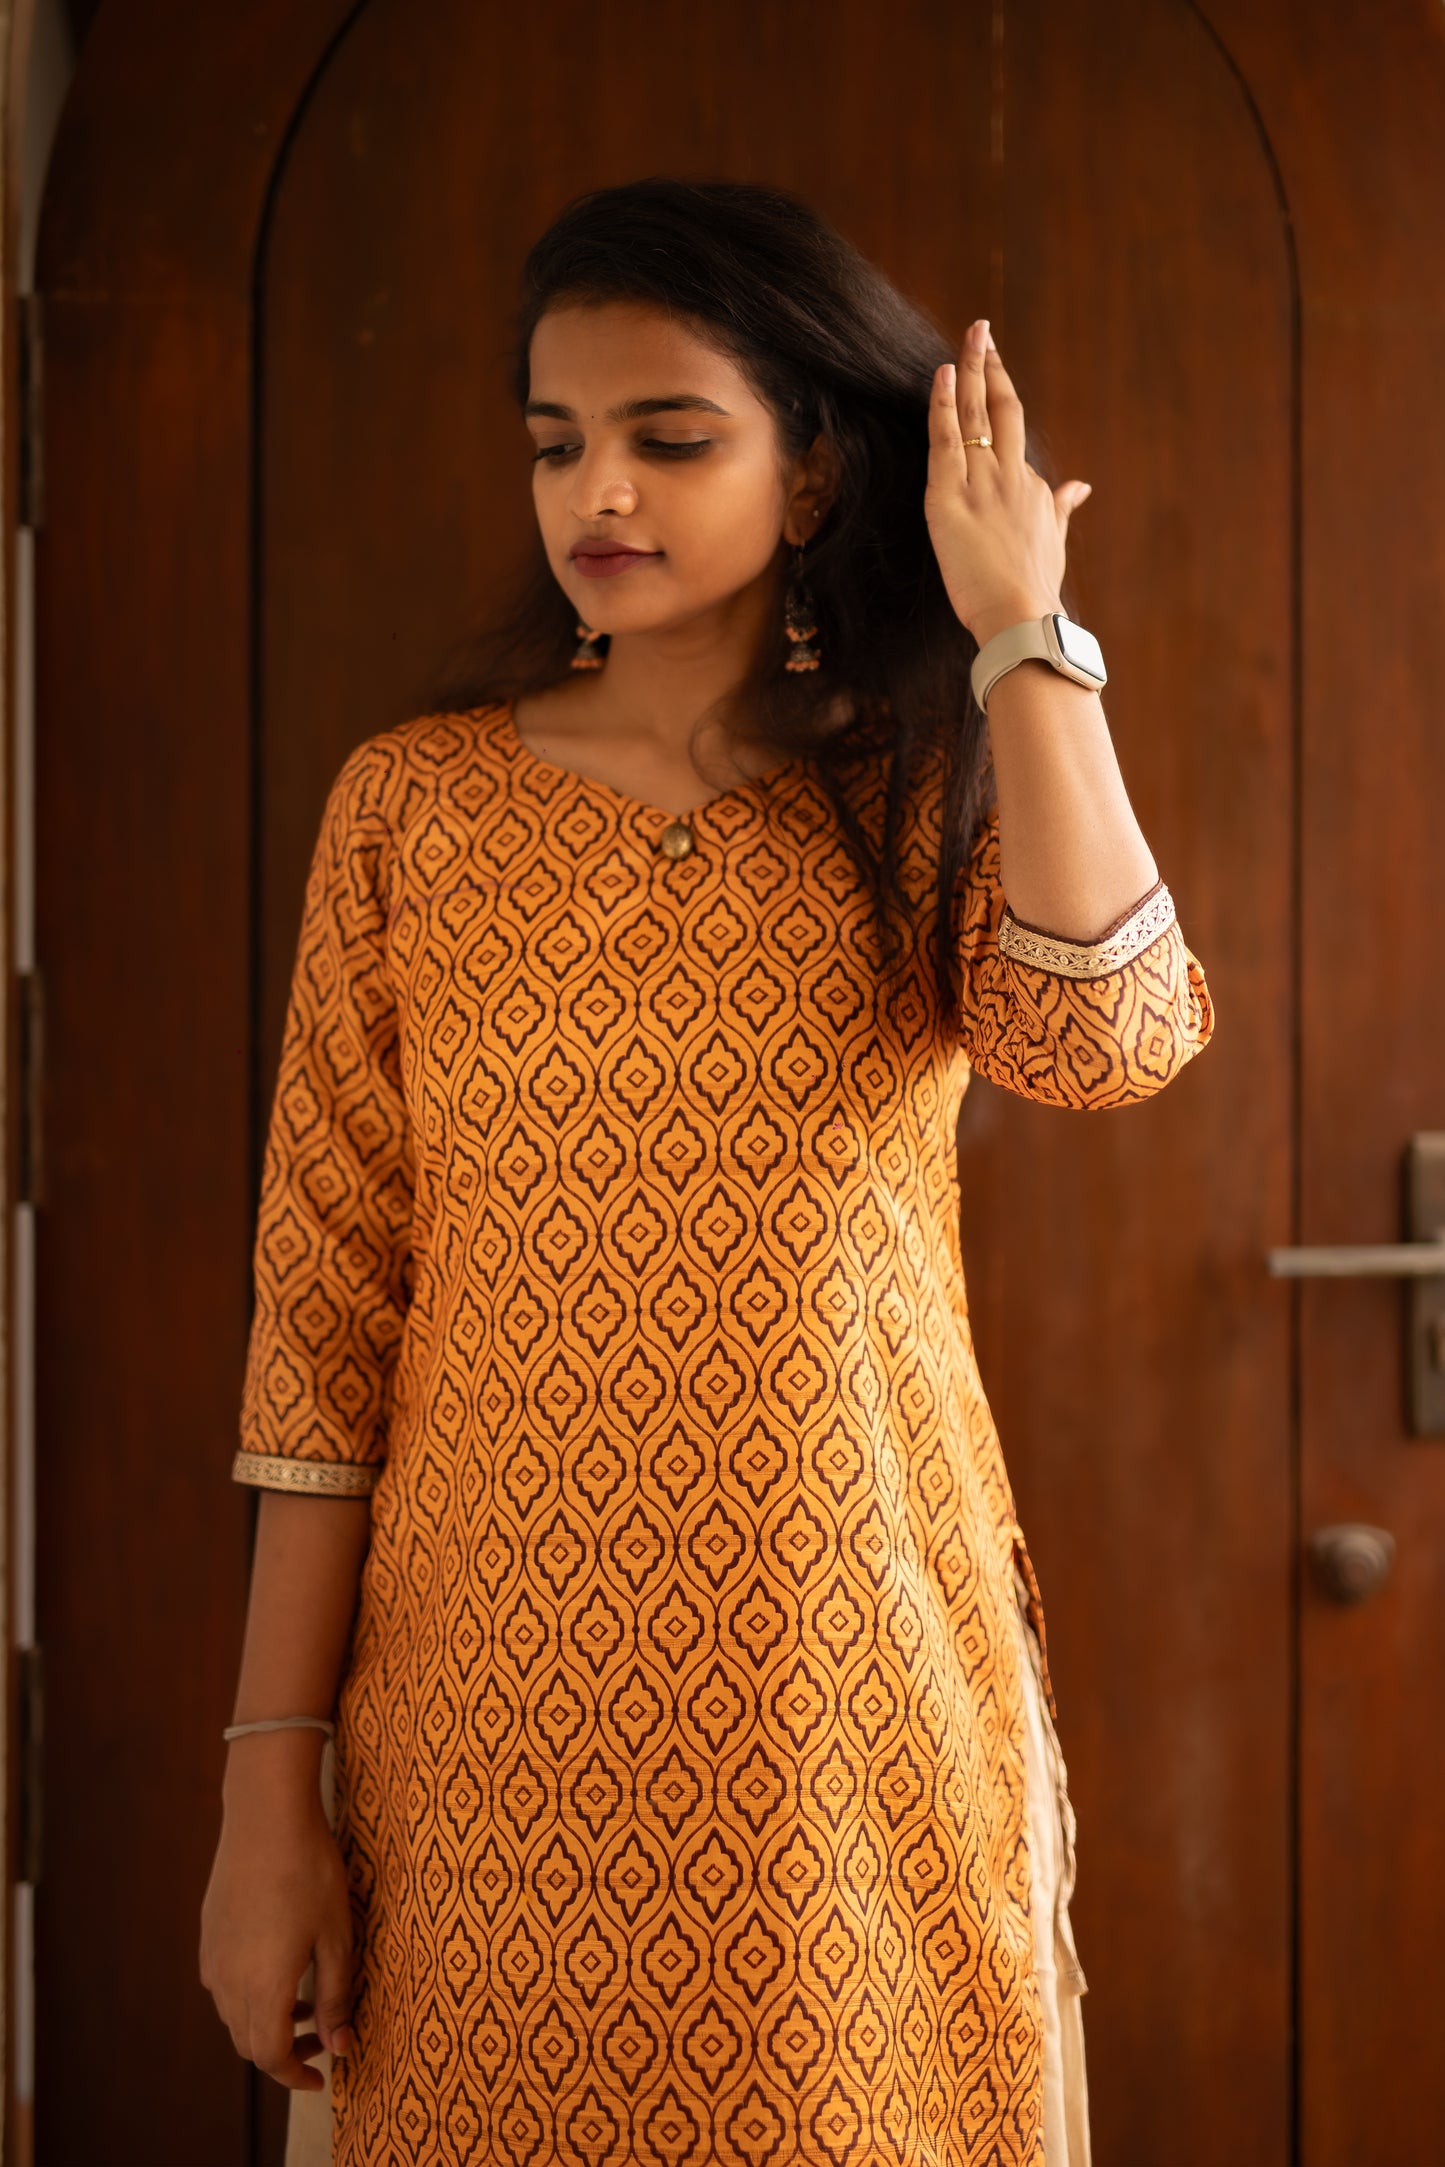 A Classic Sakyaa design featuring semi tussar fabric, lined with a warm and elegant gold lace and 3/4th sleeves.